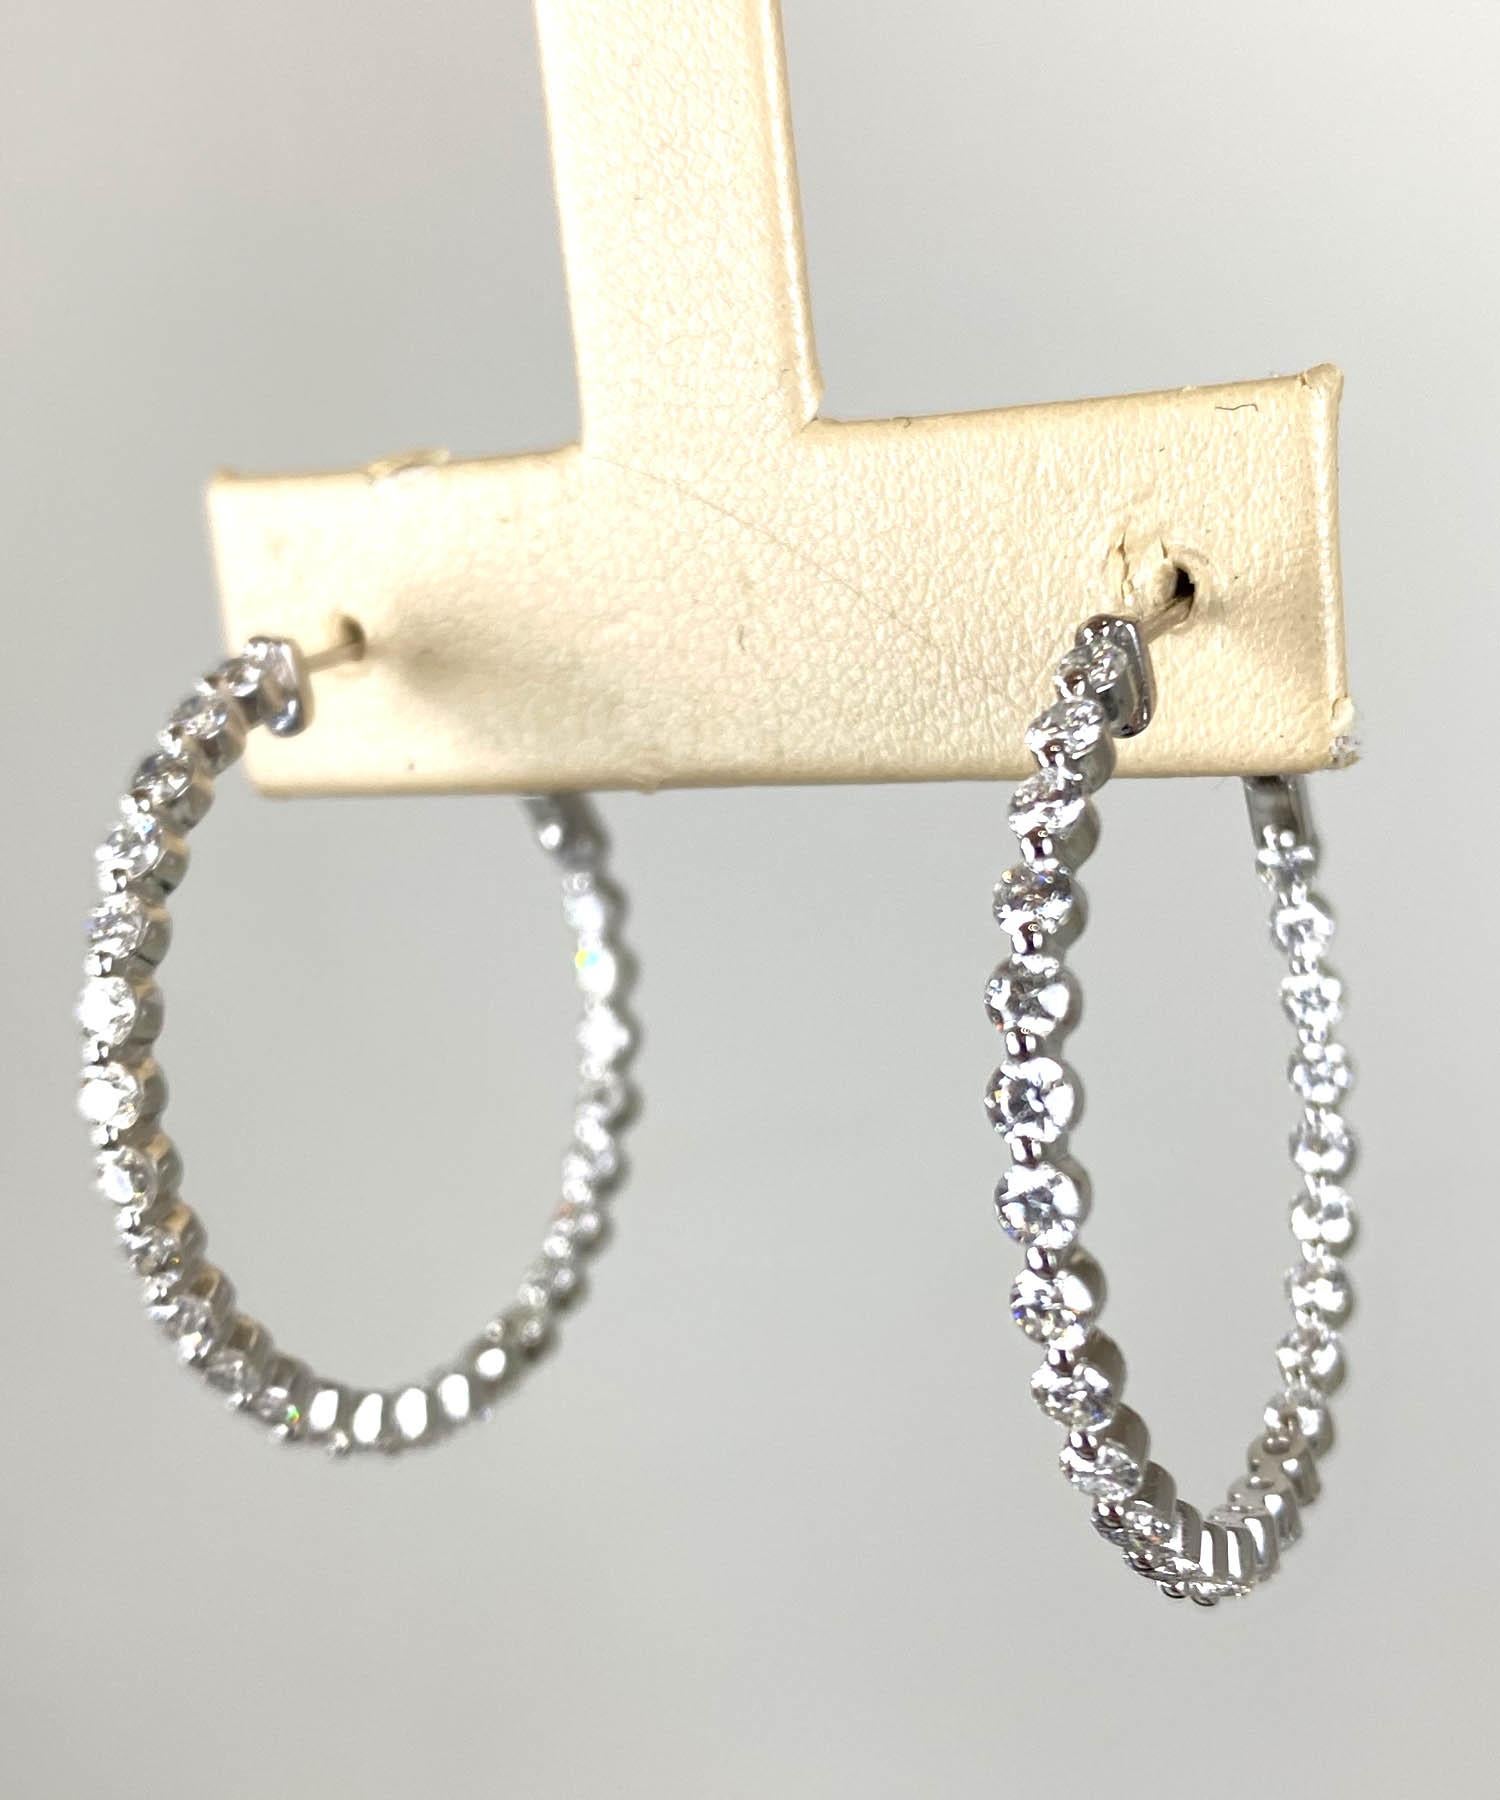 Beautiful hoop earrings are composed of 18k white gold with floating diamonds at the front and inside forward facing back of the hoop with English lock closures at the back. 

Diamond information:
Diamonds are inspected by a certified GIA
Weight: